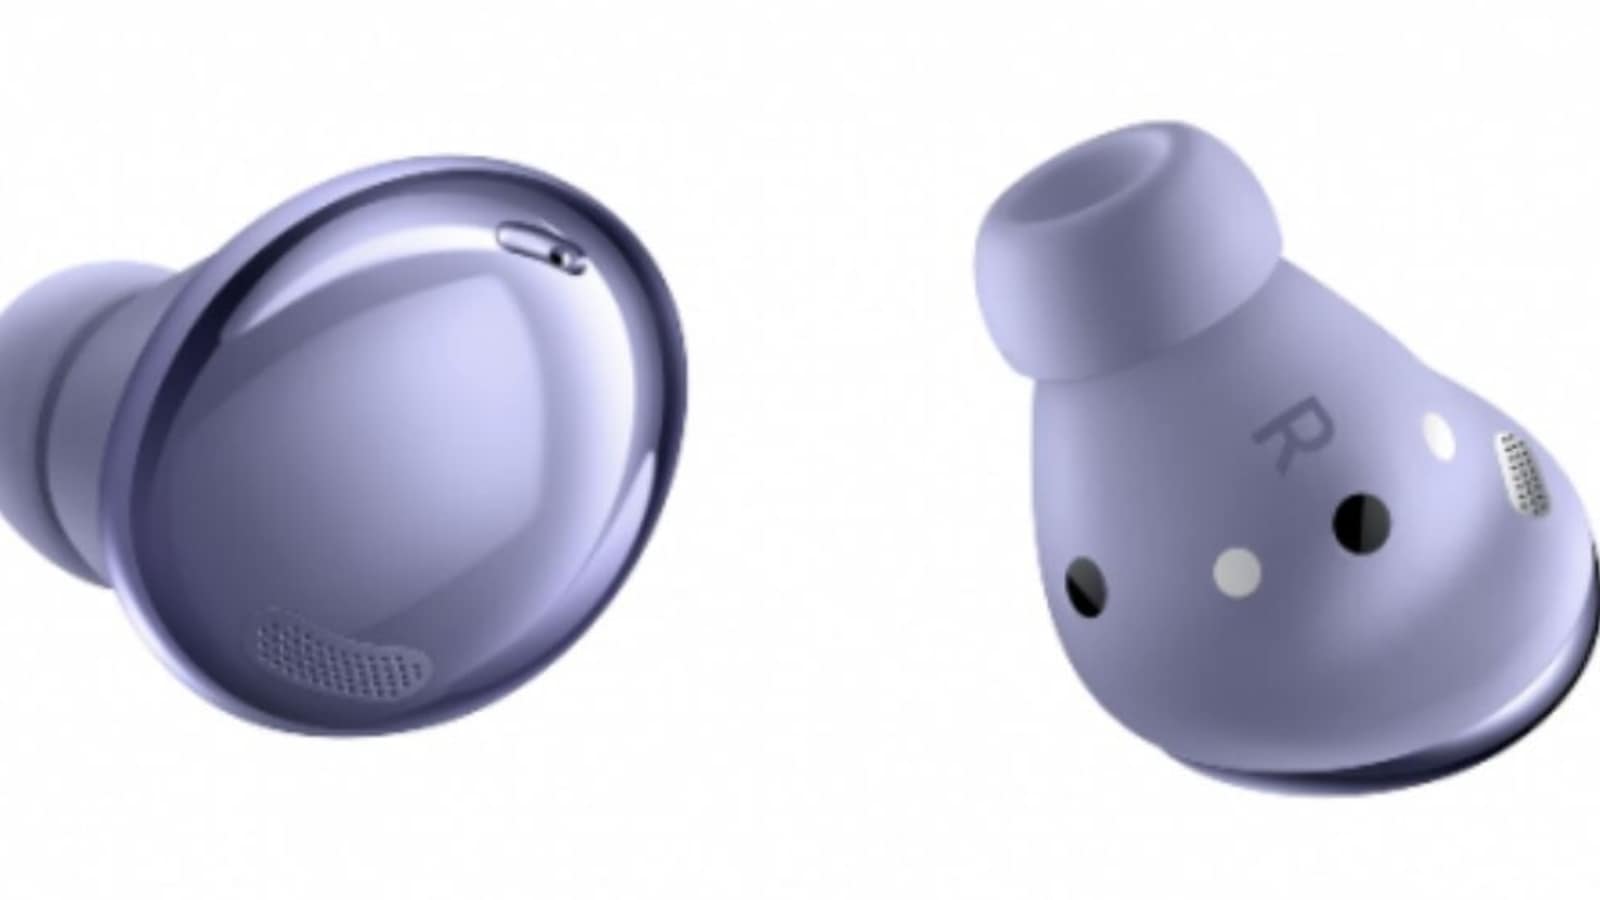 Samsung, on one of its portals, has published a guide that gives detailed steps for cleaning its Galaxy Buds series earbuds. Its guide is valid for Ga